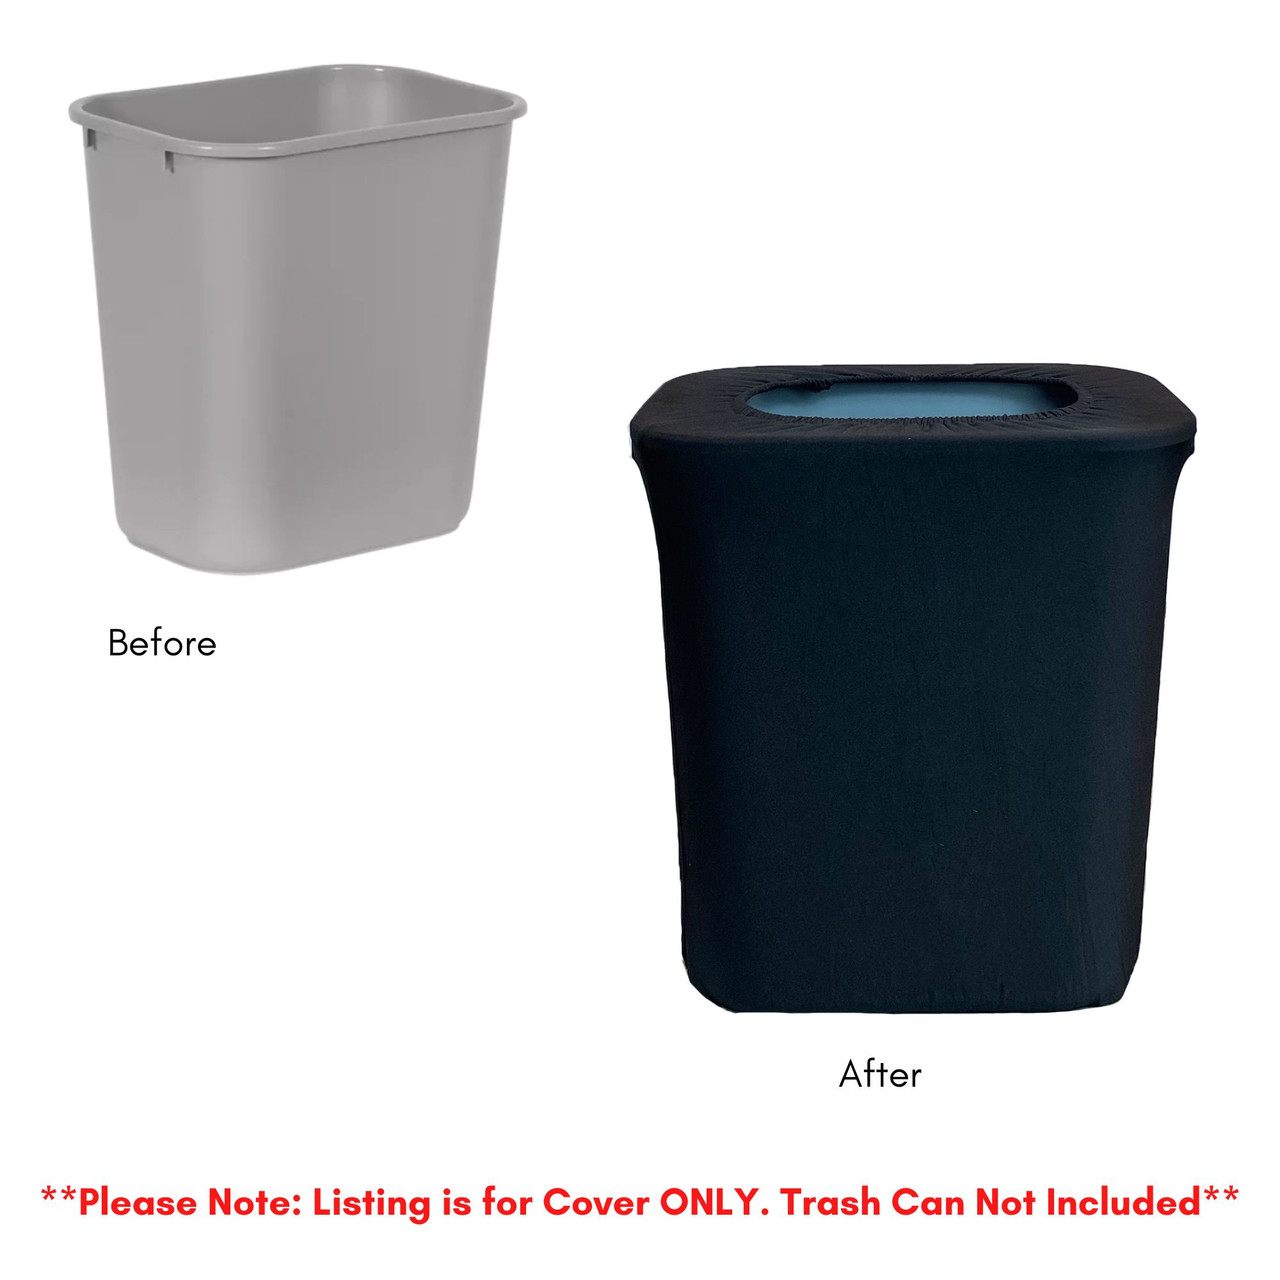 https://cdn11.bigcommerce.com/s-bch7e9/images/stencil/1280x1280/products/2194/15206/7-gal-trash-can-before-after__97554.1667250727.jpg?c=2